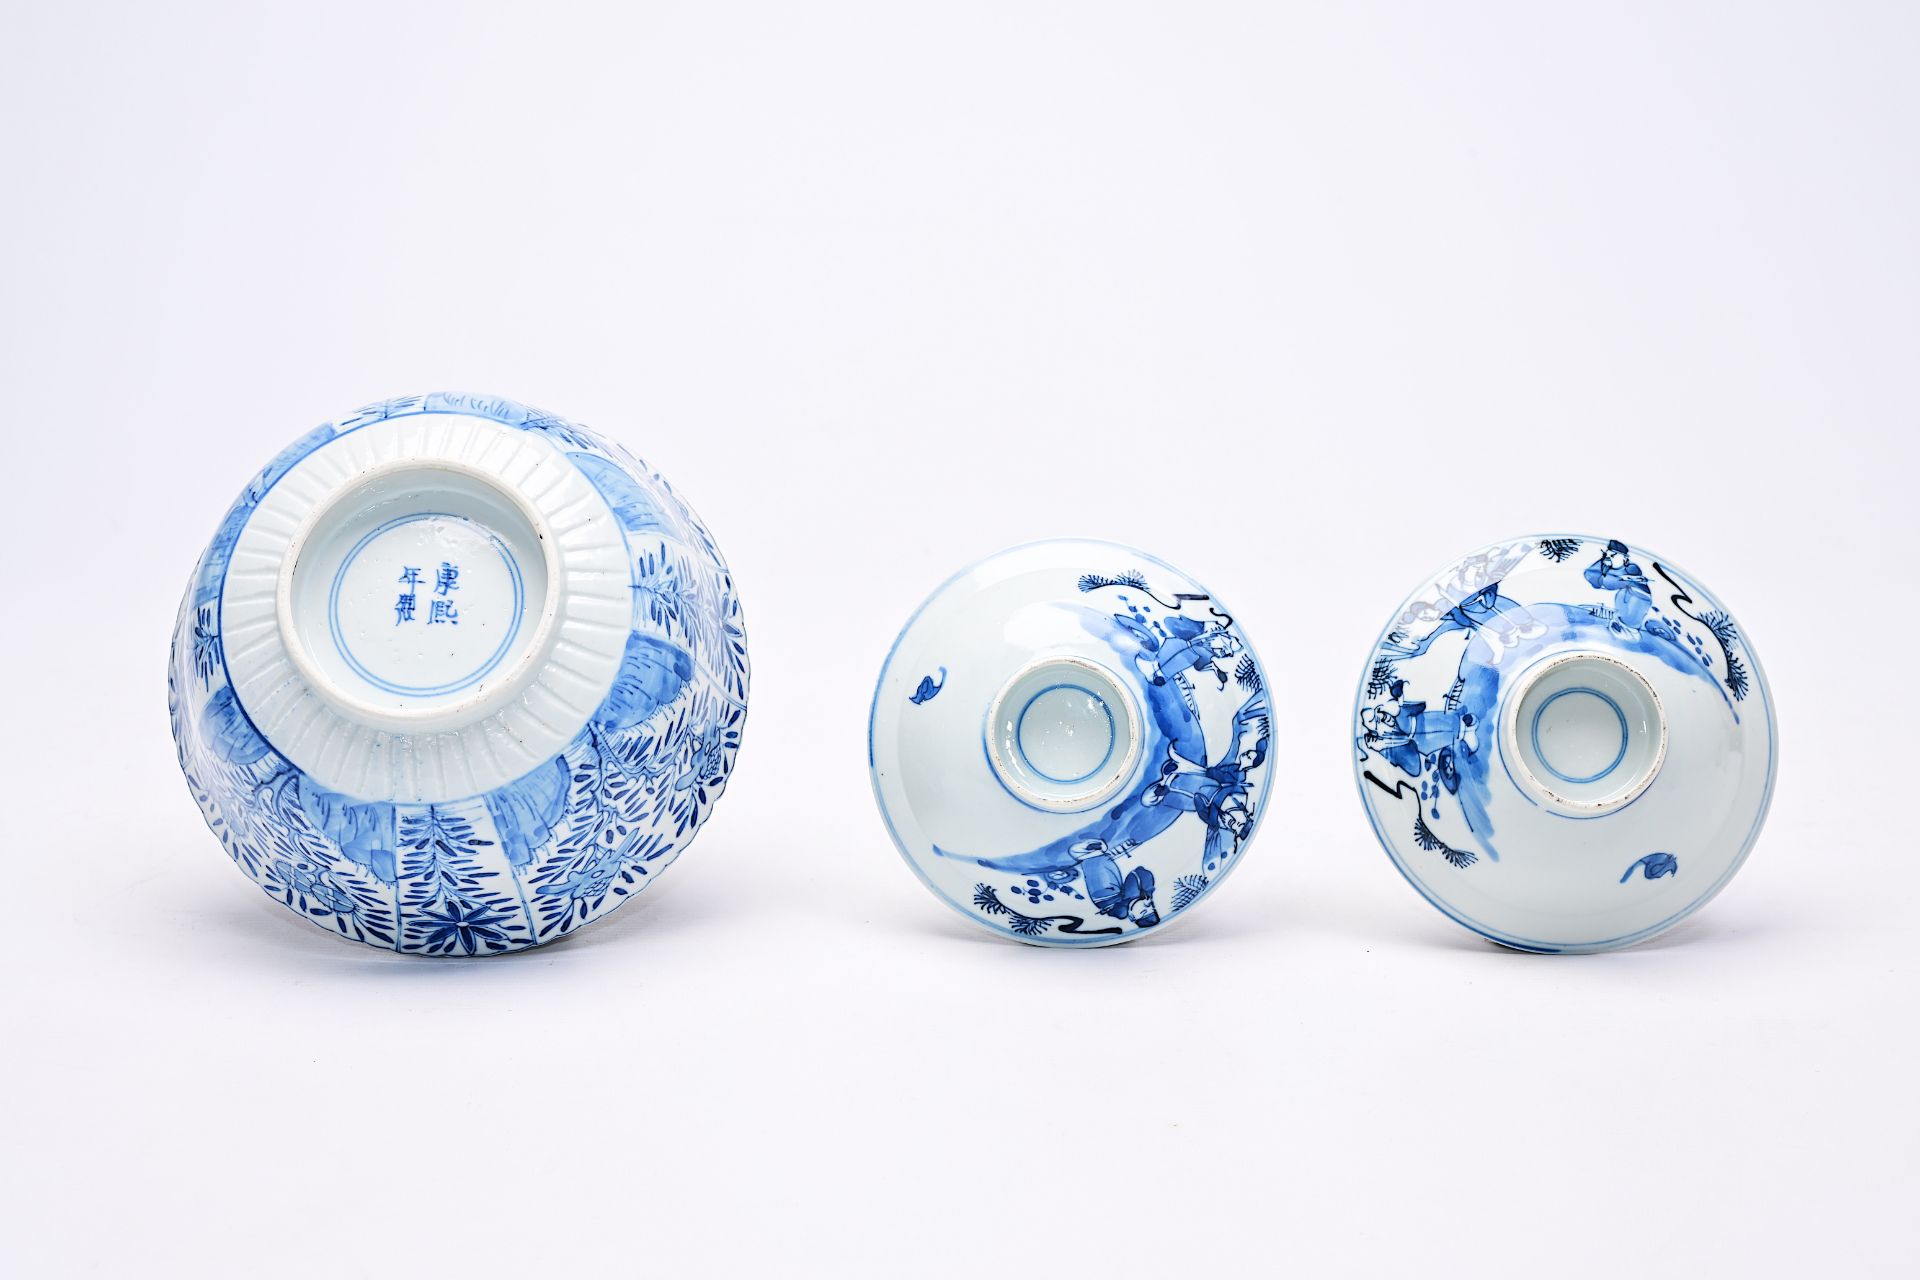 A varied collection of Chinese blue and white porcelain with floral design and figures in a landscap - Image 6 of 22